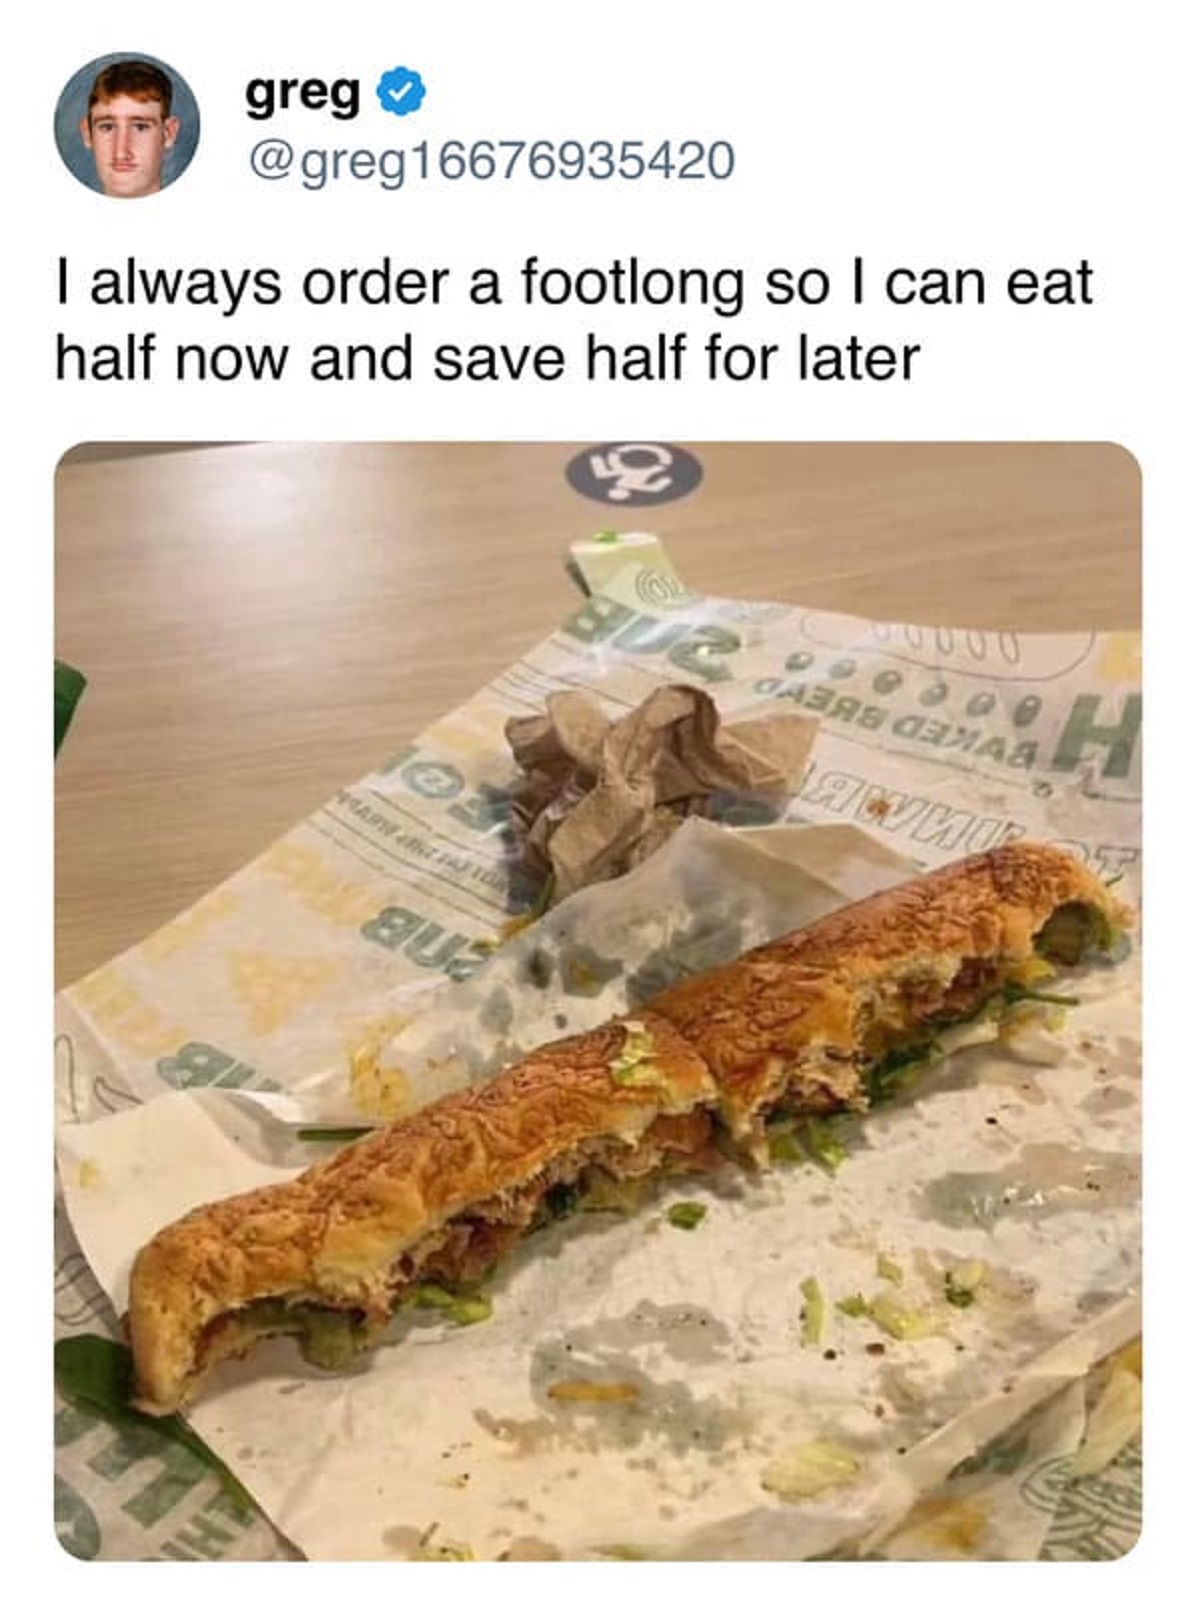 recipe - greg I always order a footlong so I can eat half now and save half for later Marte Cot Pa Tor 20 802 Cara Memas Awnu H